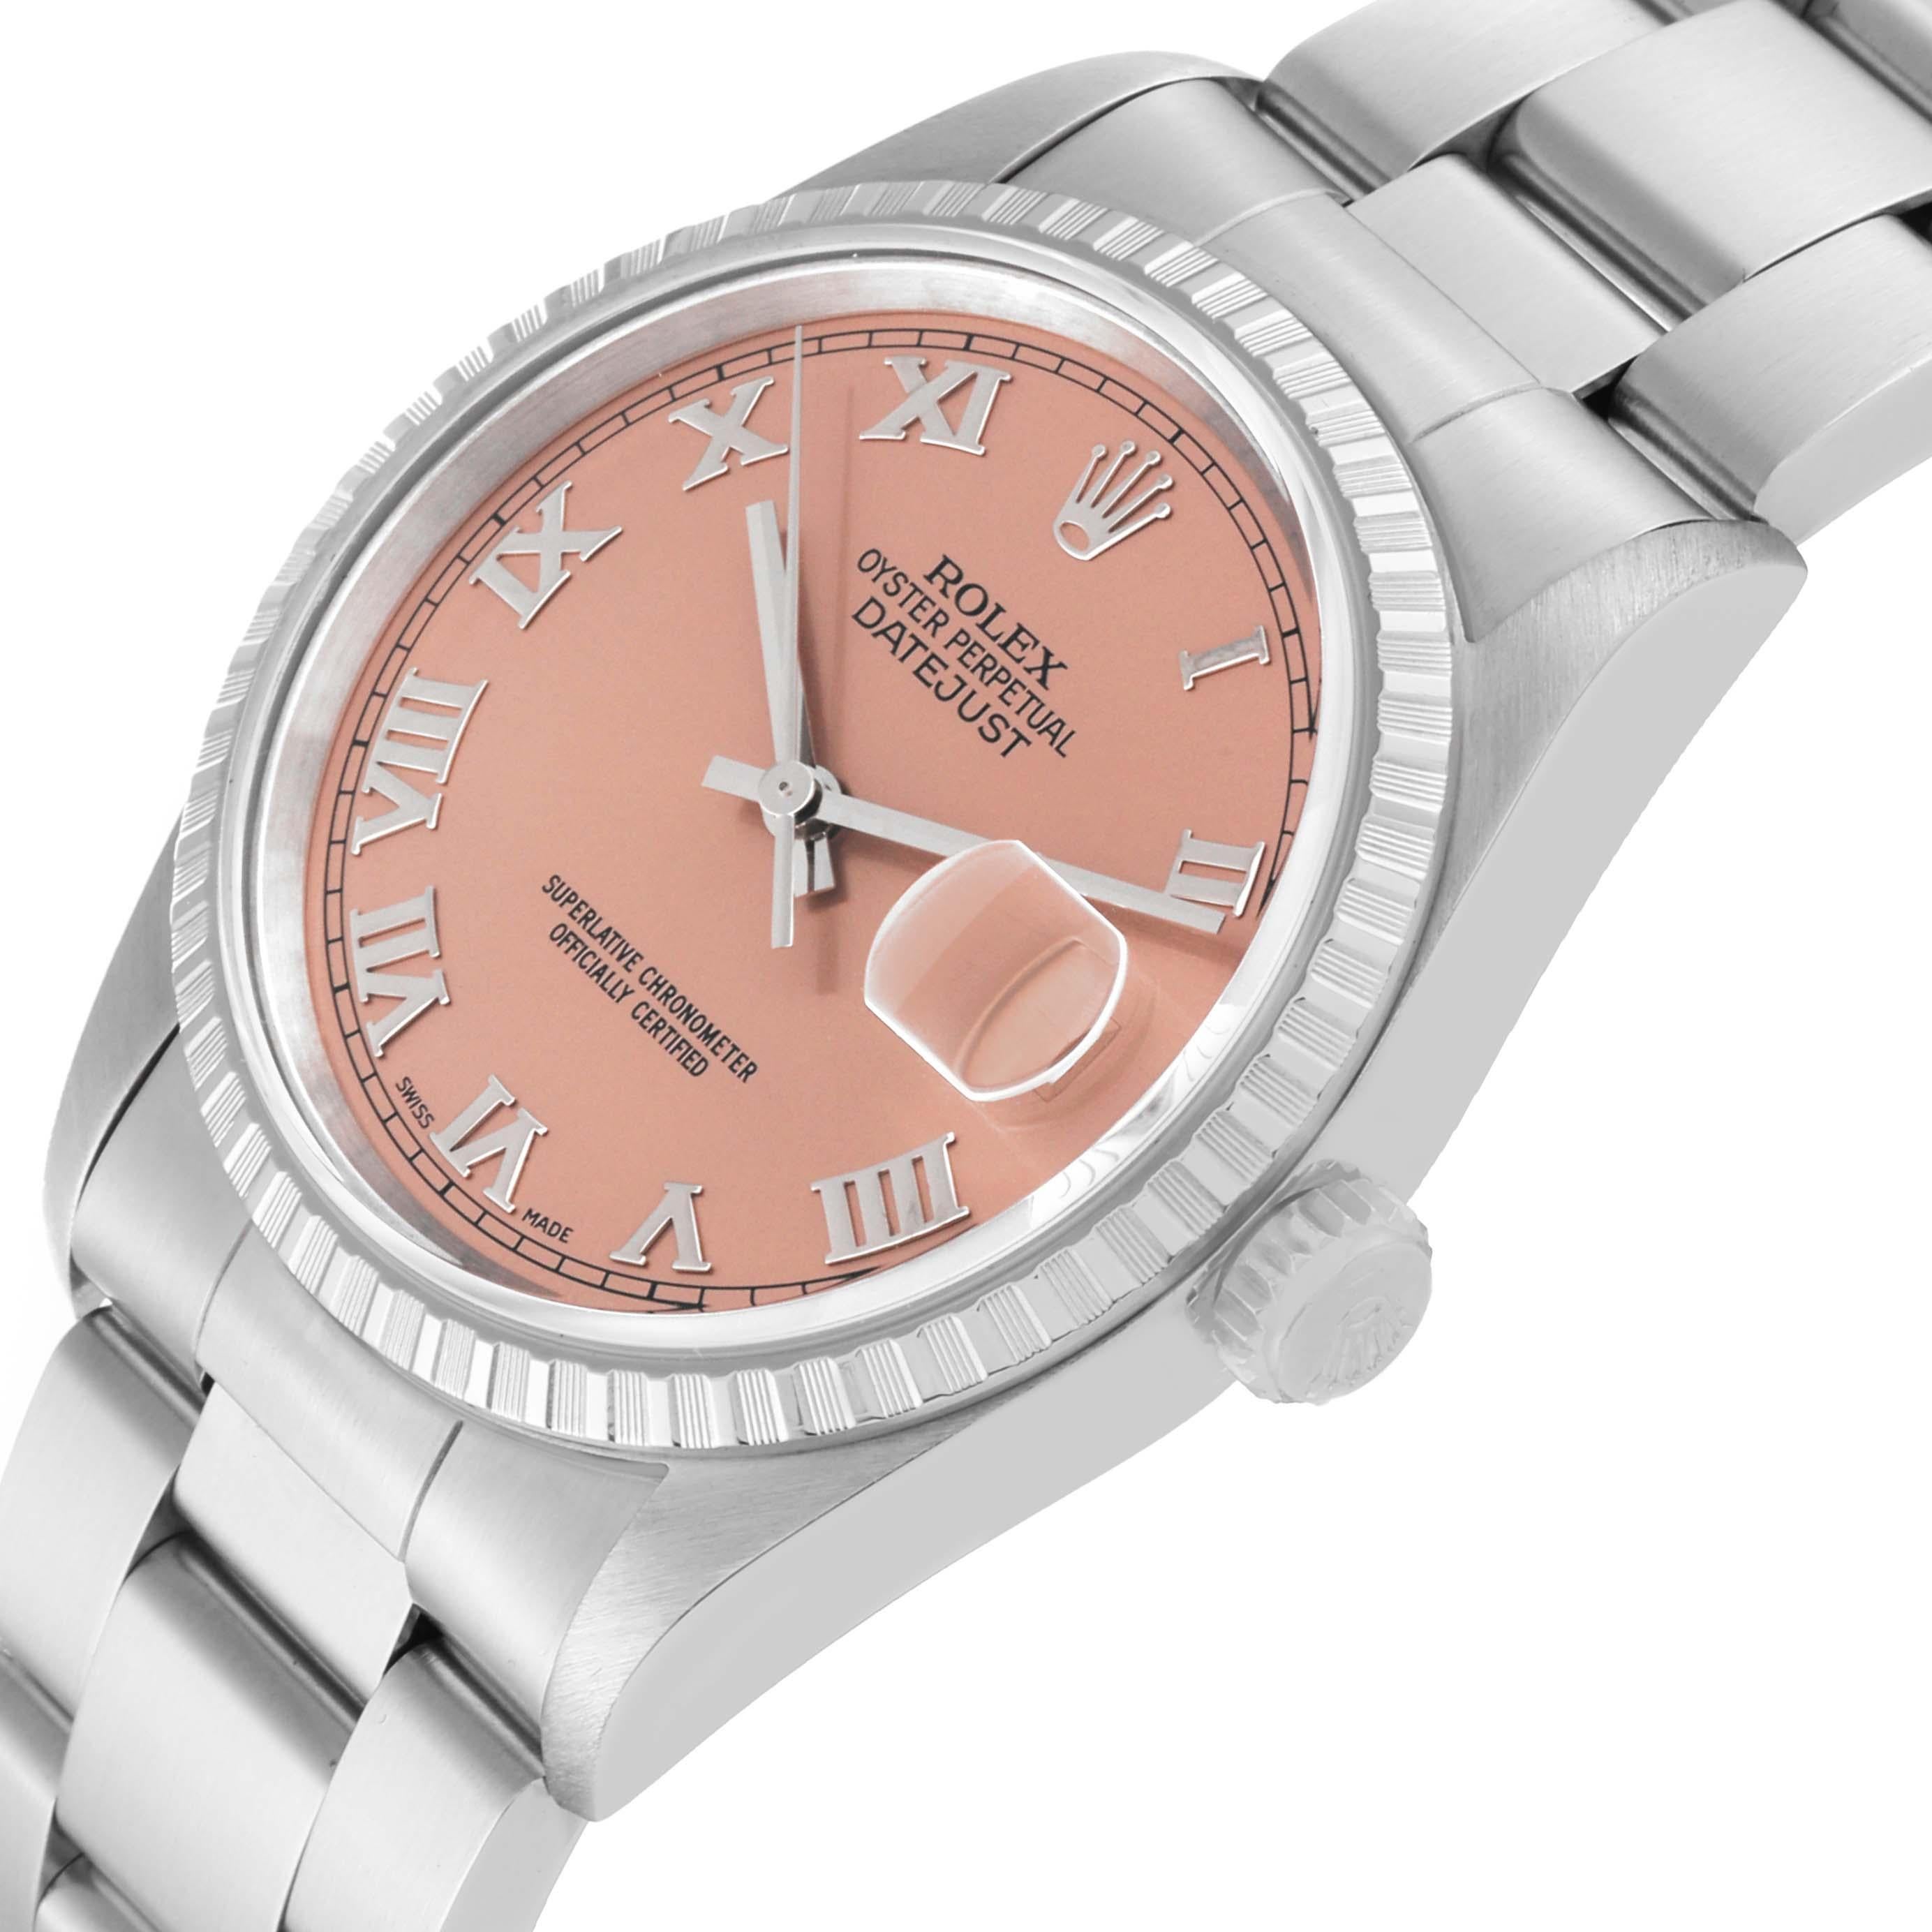 Rolex Datejust 36 Salmon Roman Dial Steel Mens Watch 16220 Box Papers For Sale 1